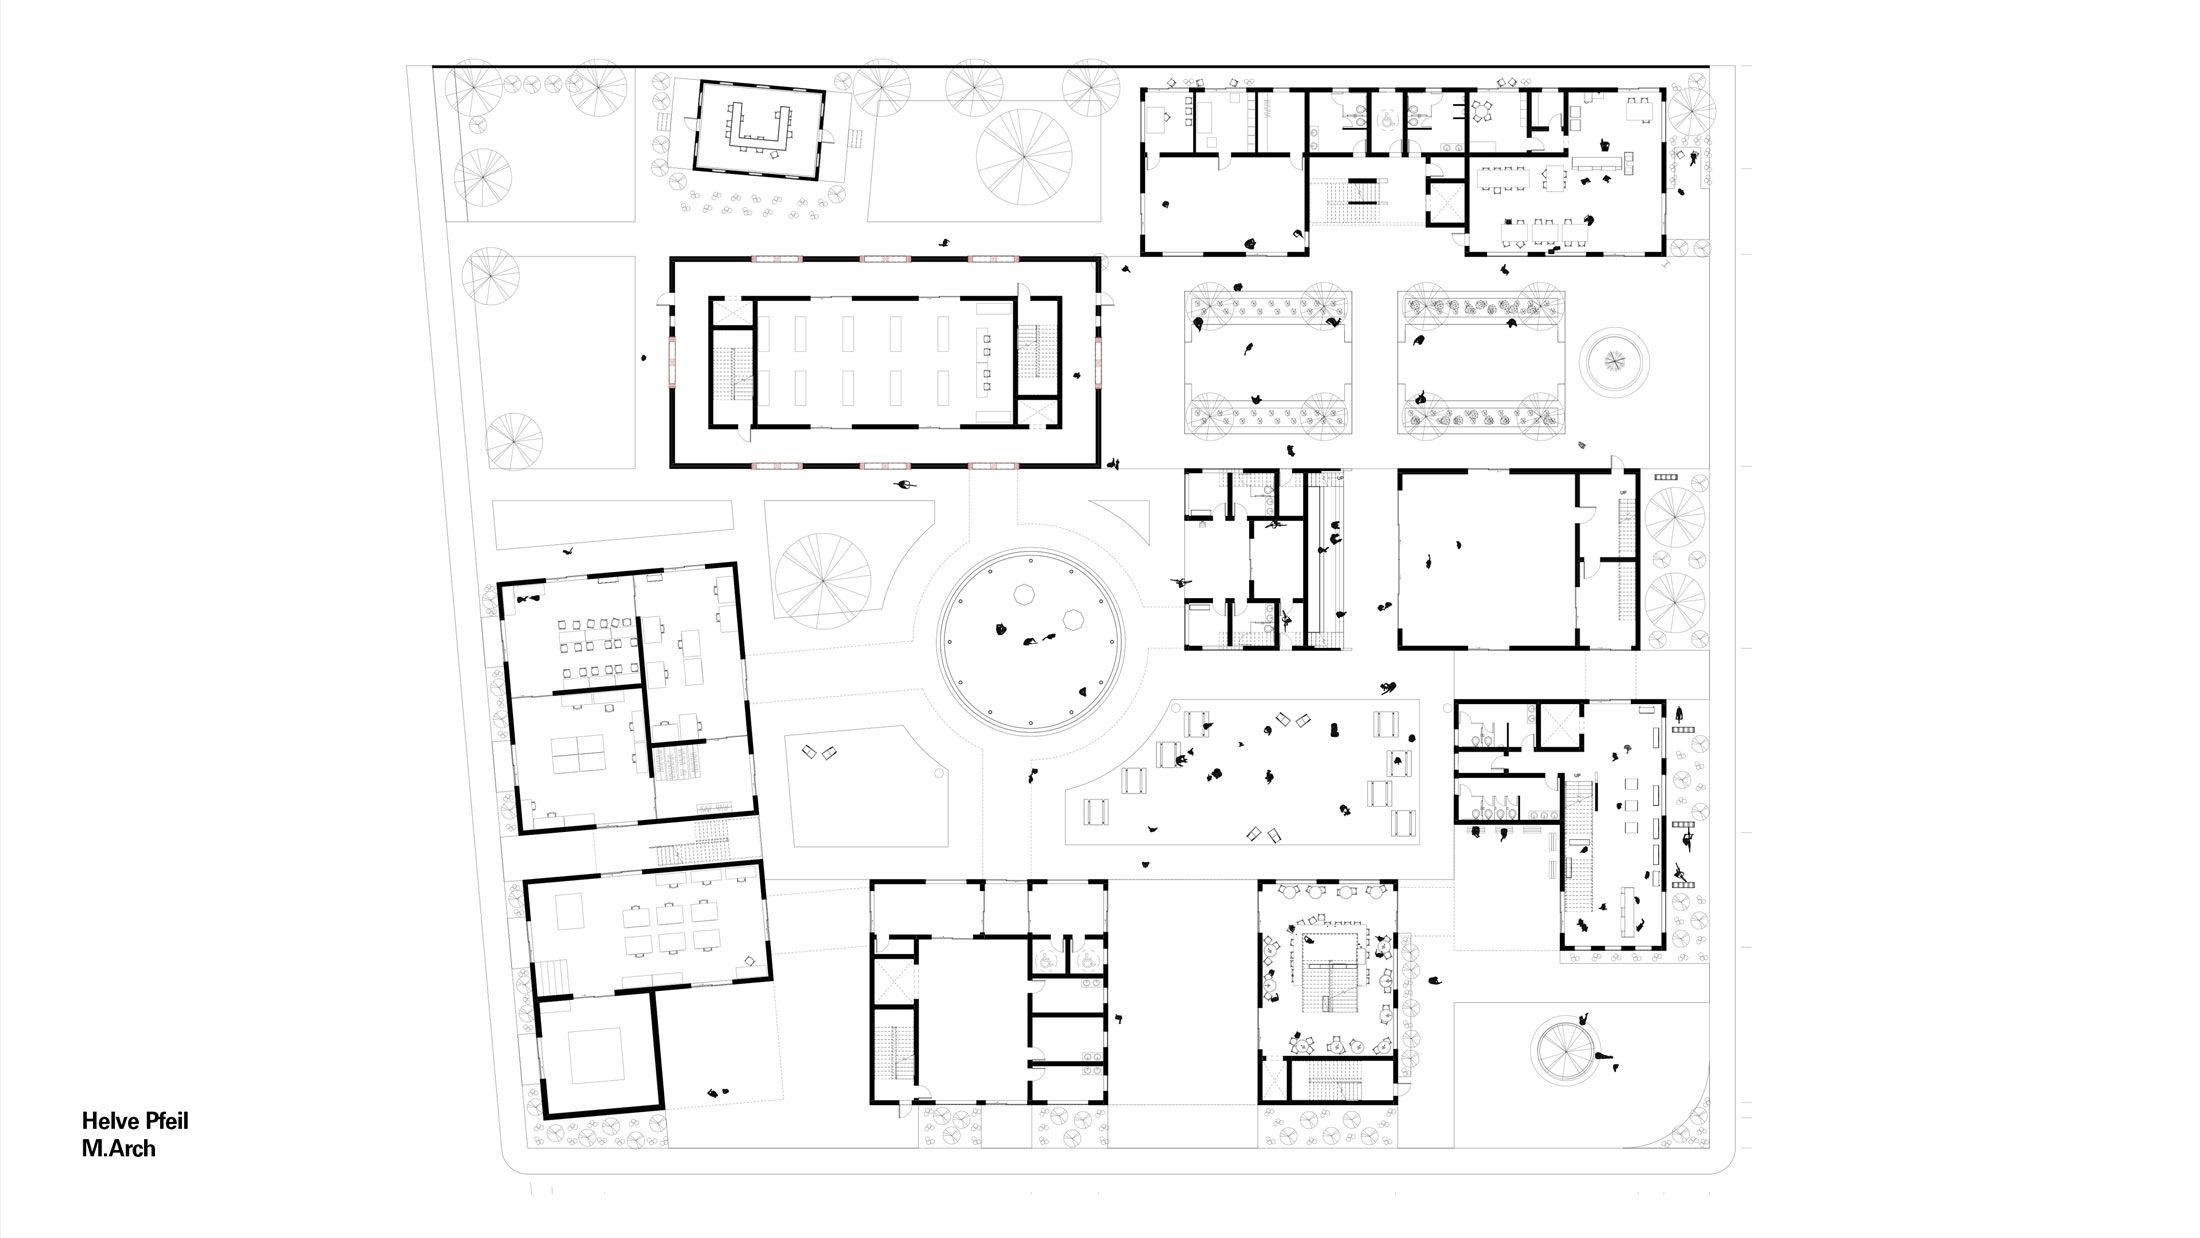 Adaptability - Adaptable Community Center: Architecture in a Rural Context – Plan 2